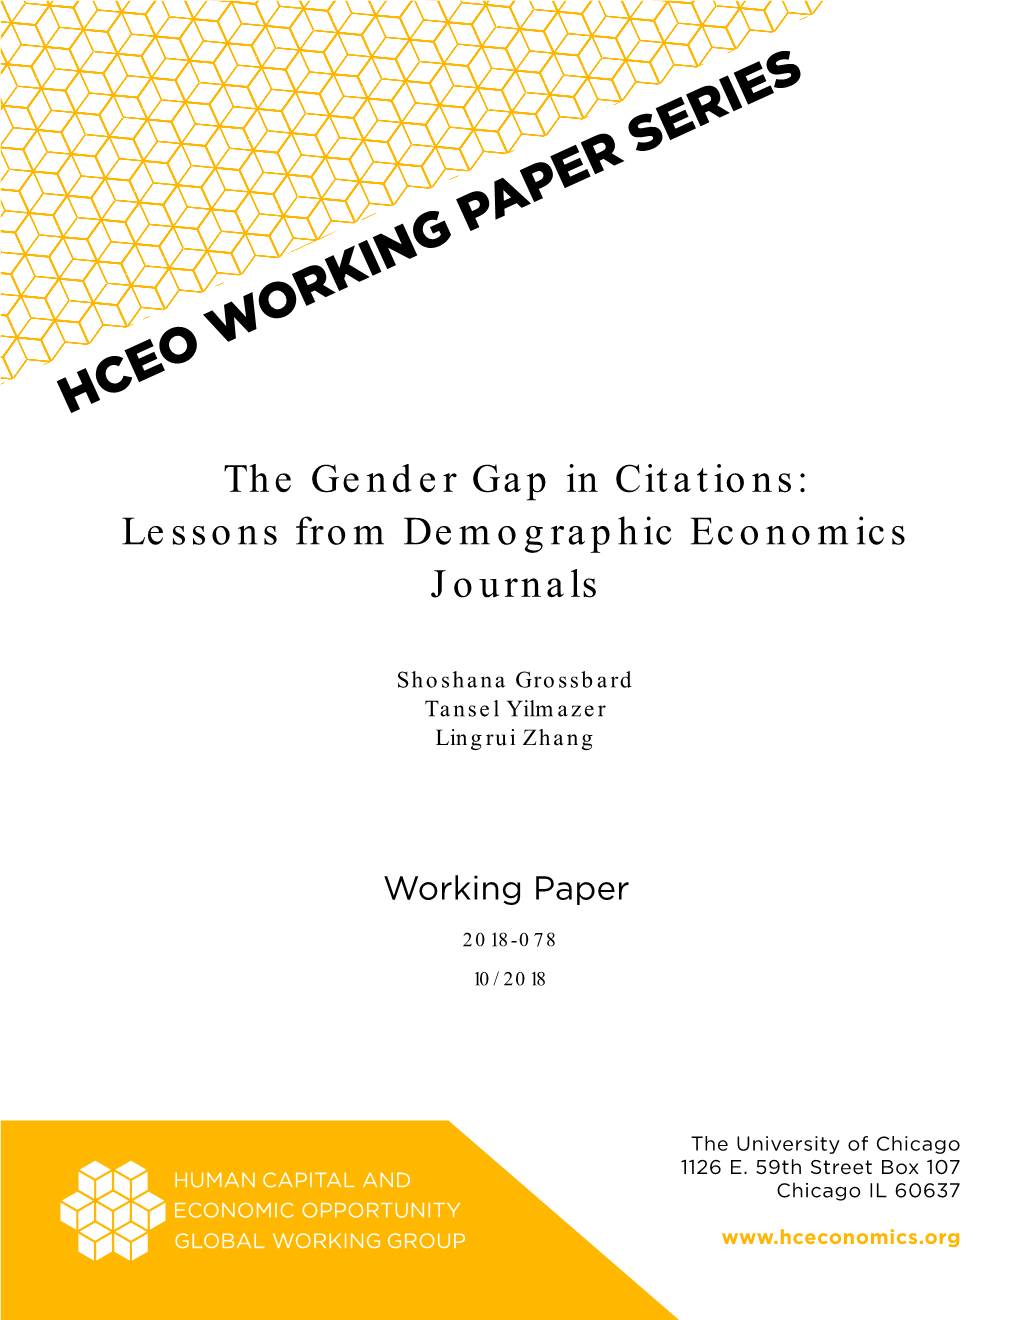 The Gender Gap in Citations: Lessons from Demographic Economics Journals